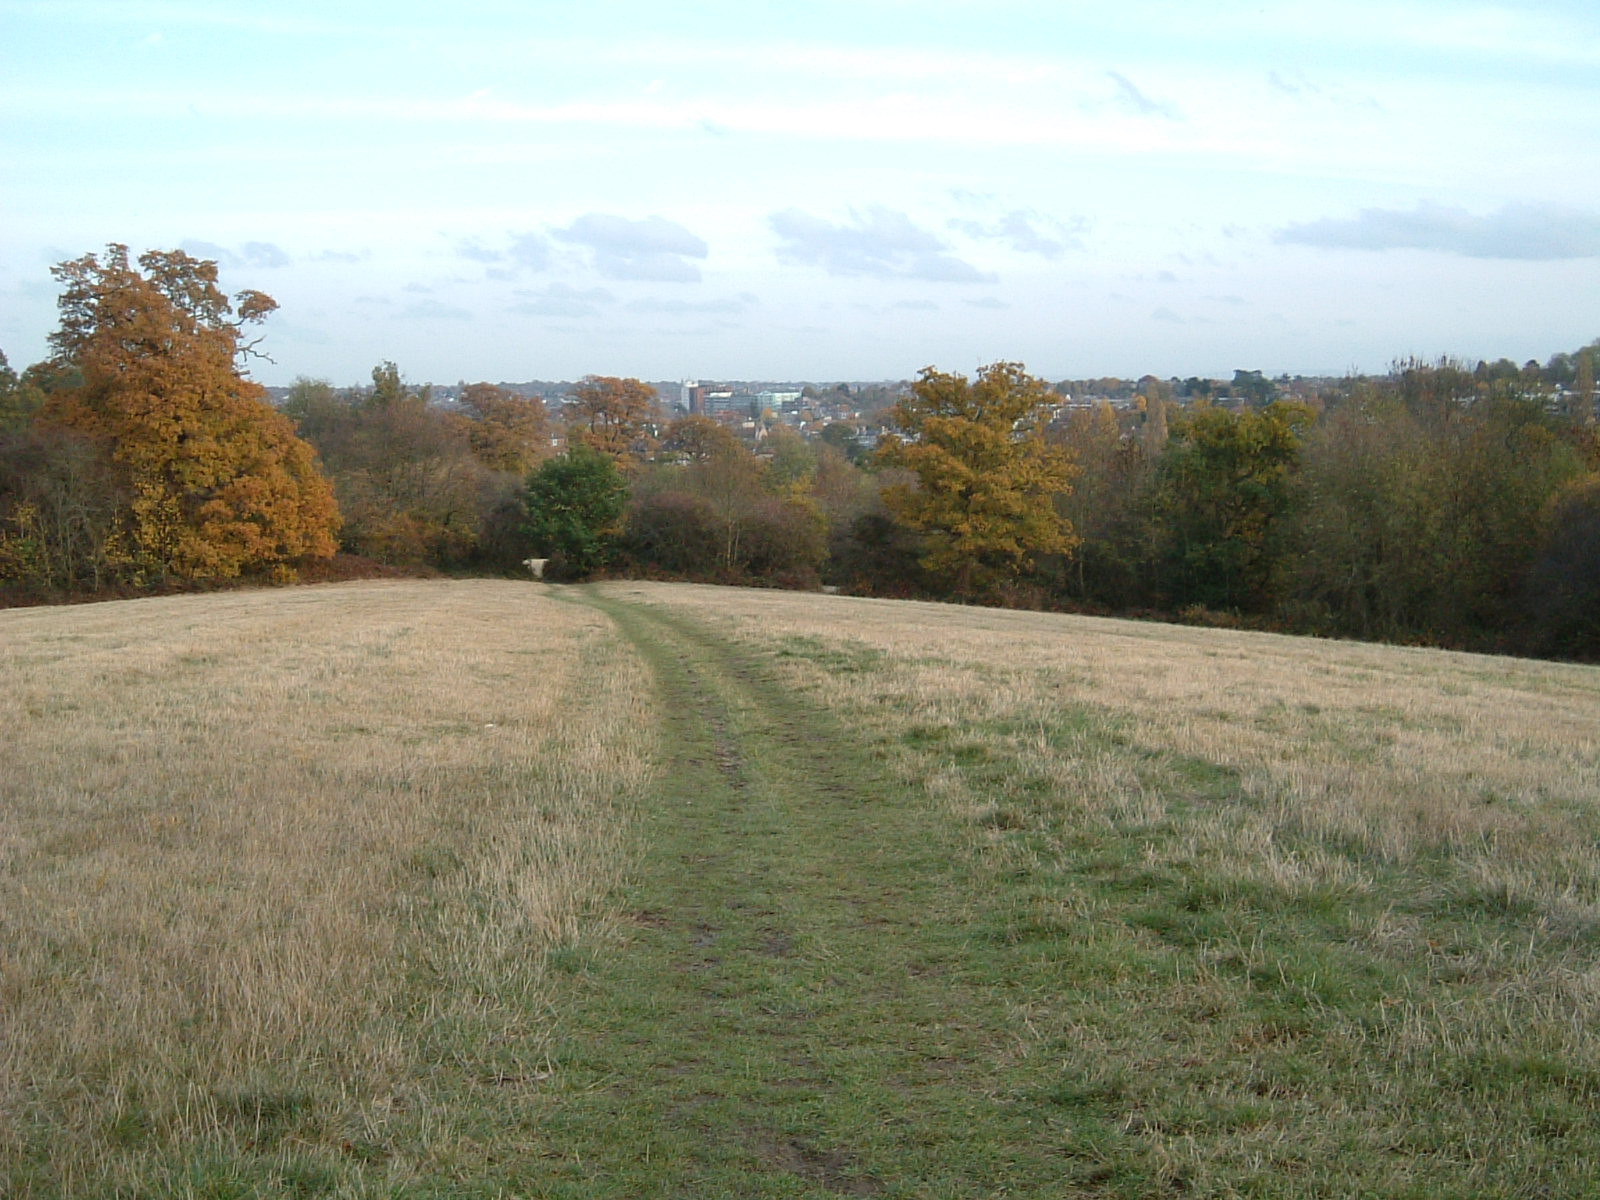 The view south from Hadley Green